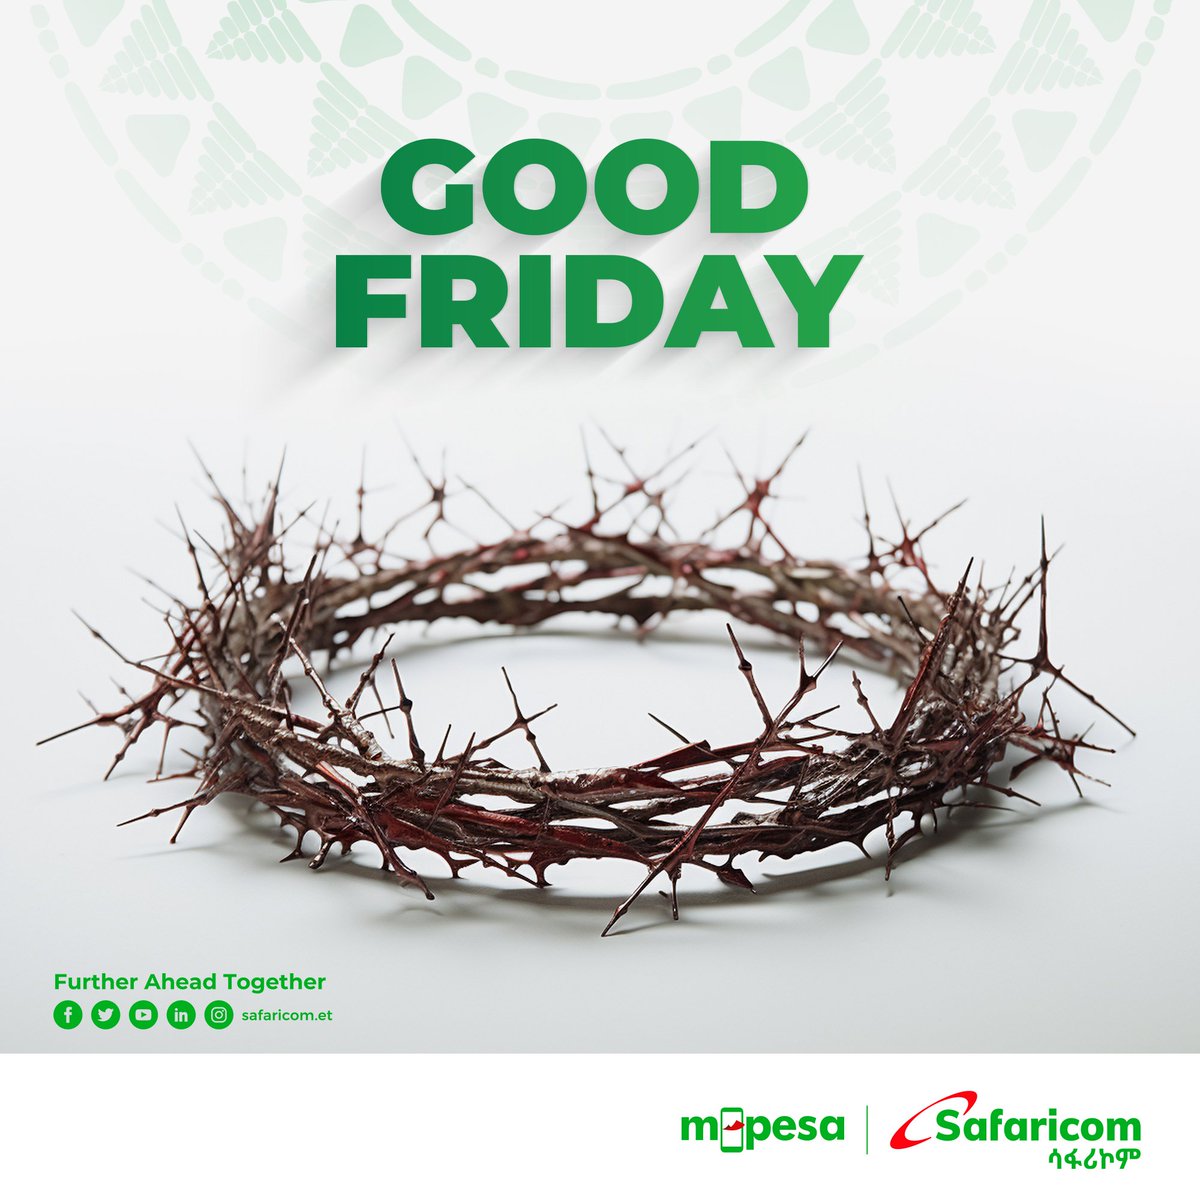 Wishing all Christian believers a delightful & a wonderful, good Friday! Happy Holidays to you all! #SafaricomEthiopia #Fasika #FurtherAheadTogether